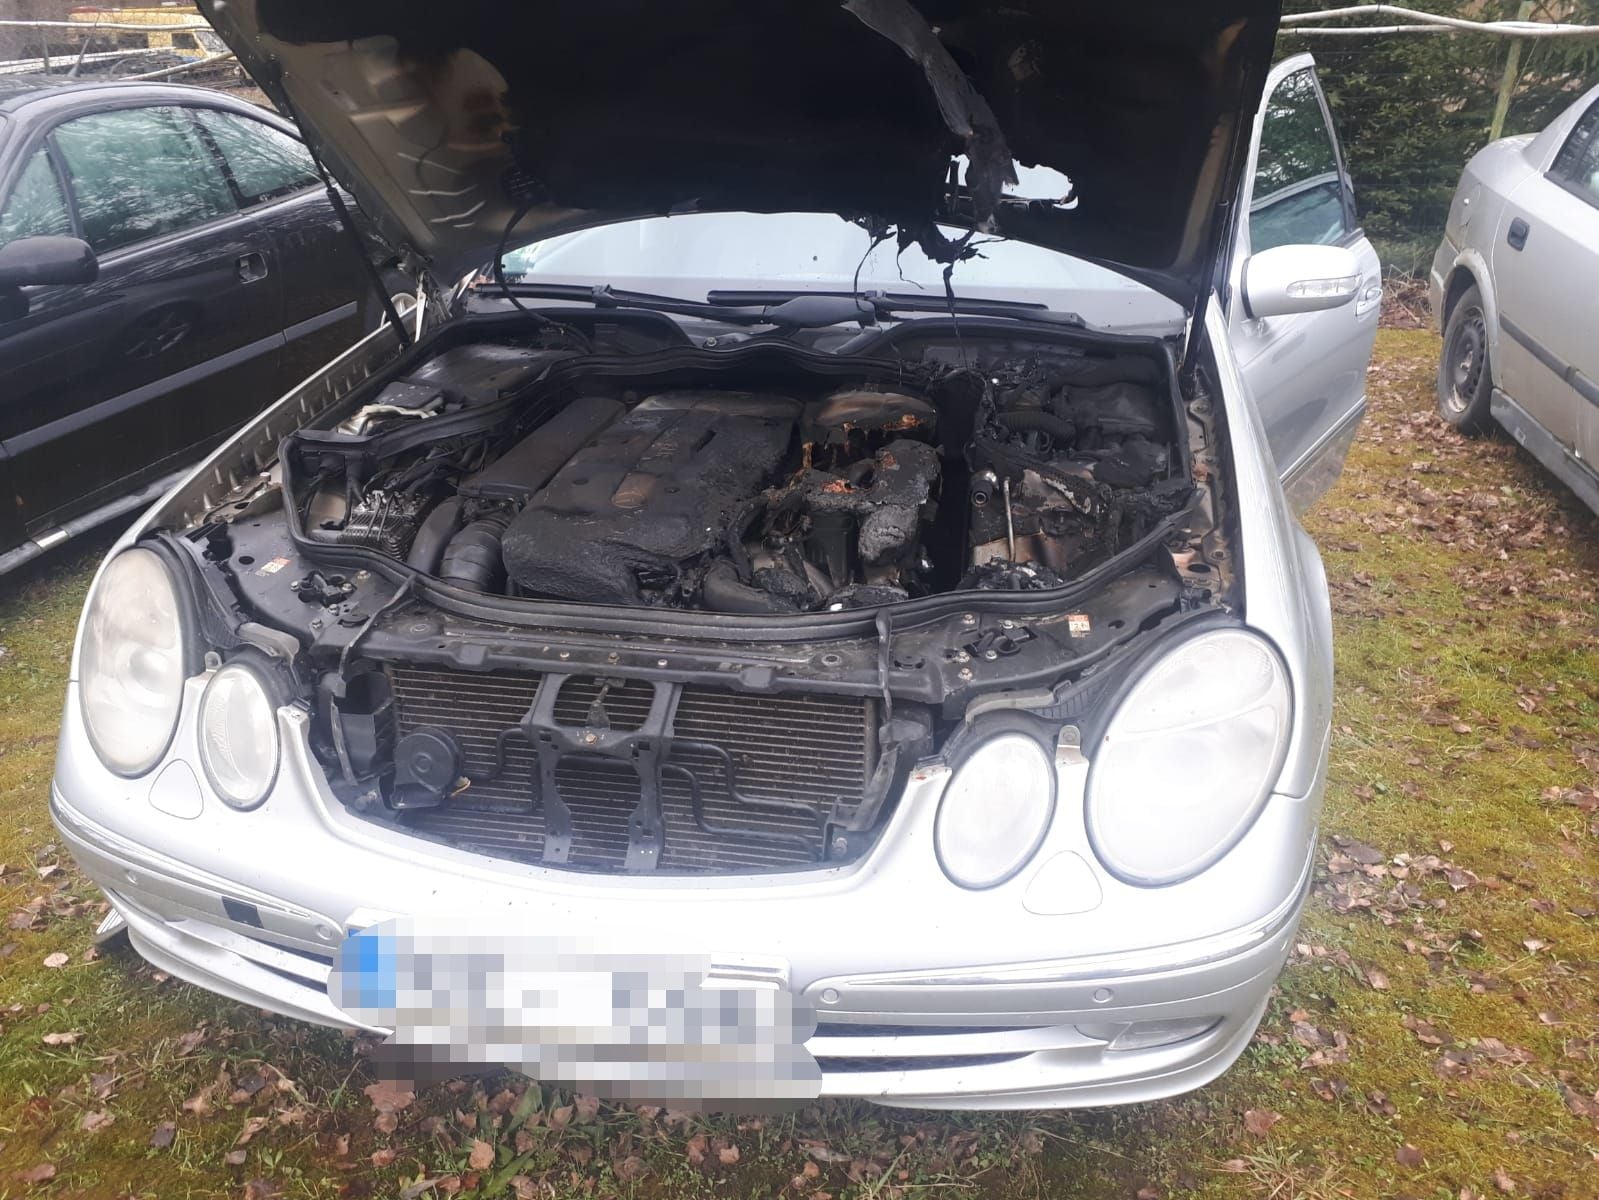 Mb e320 cdi w211 04 caught fire by itself Forums